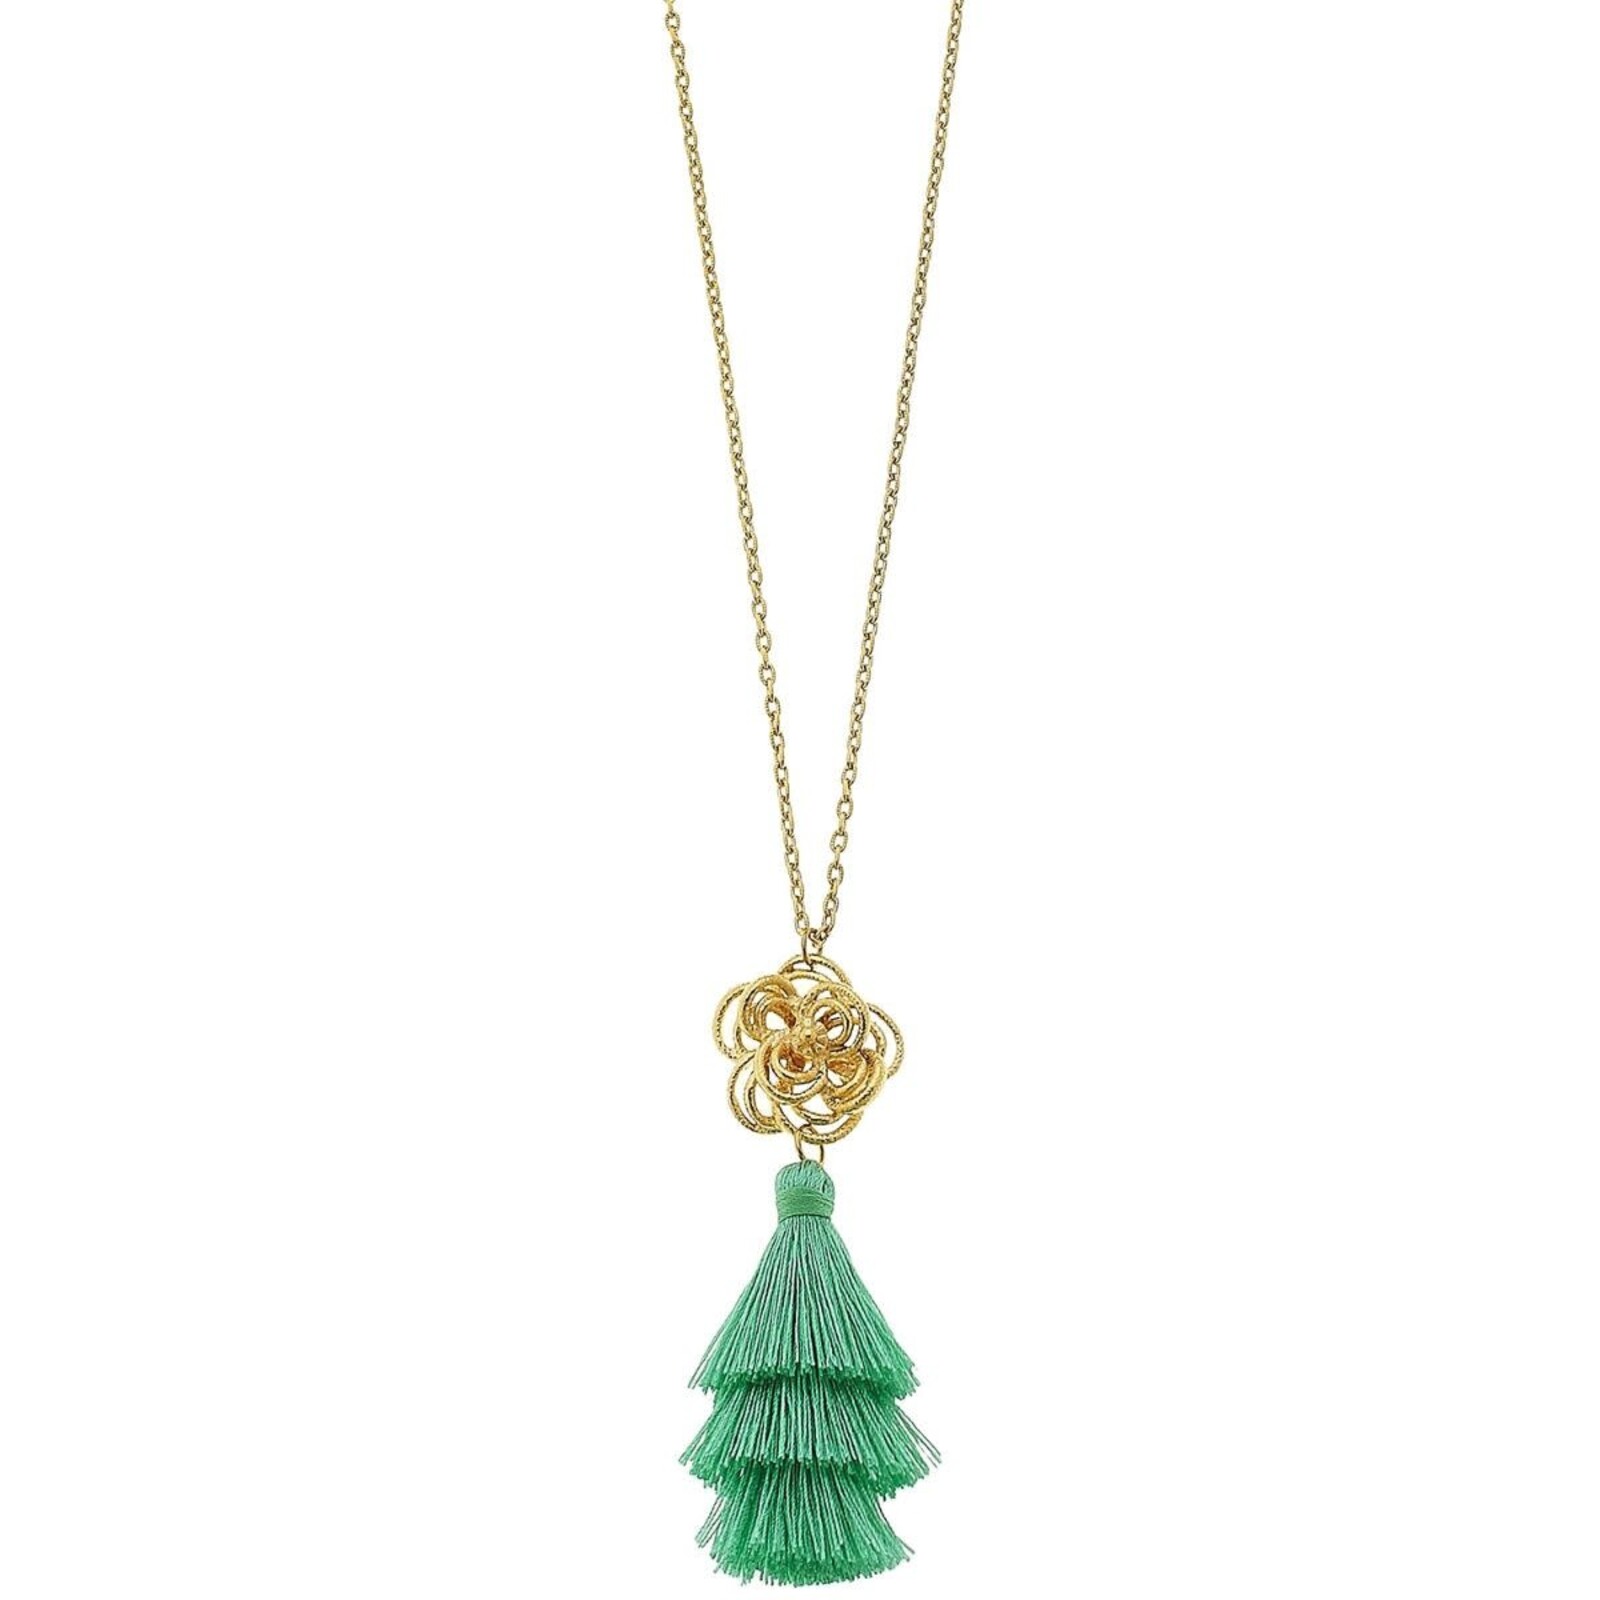 Susan Shaw Gold Open Flower and Teal Tiered Tassel Necklace3170t loading=